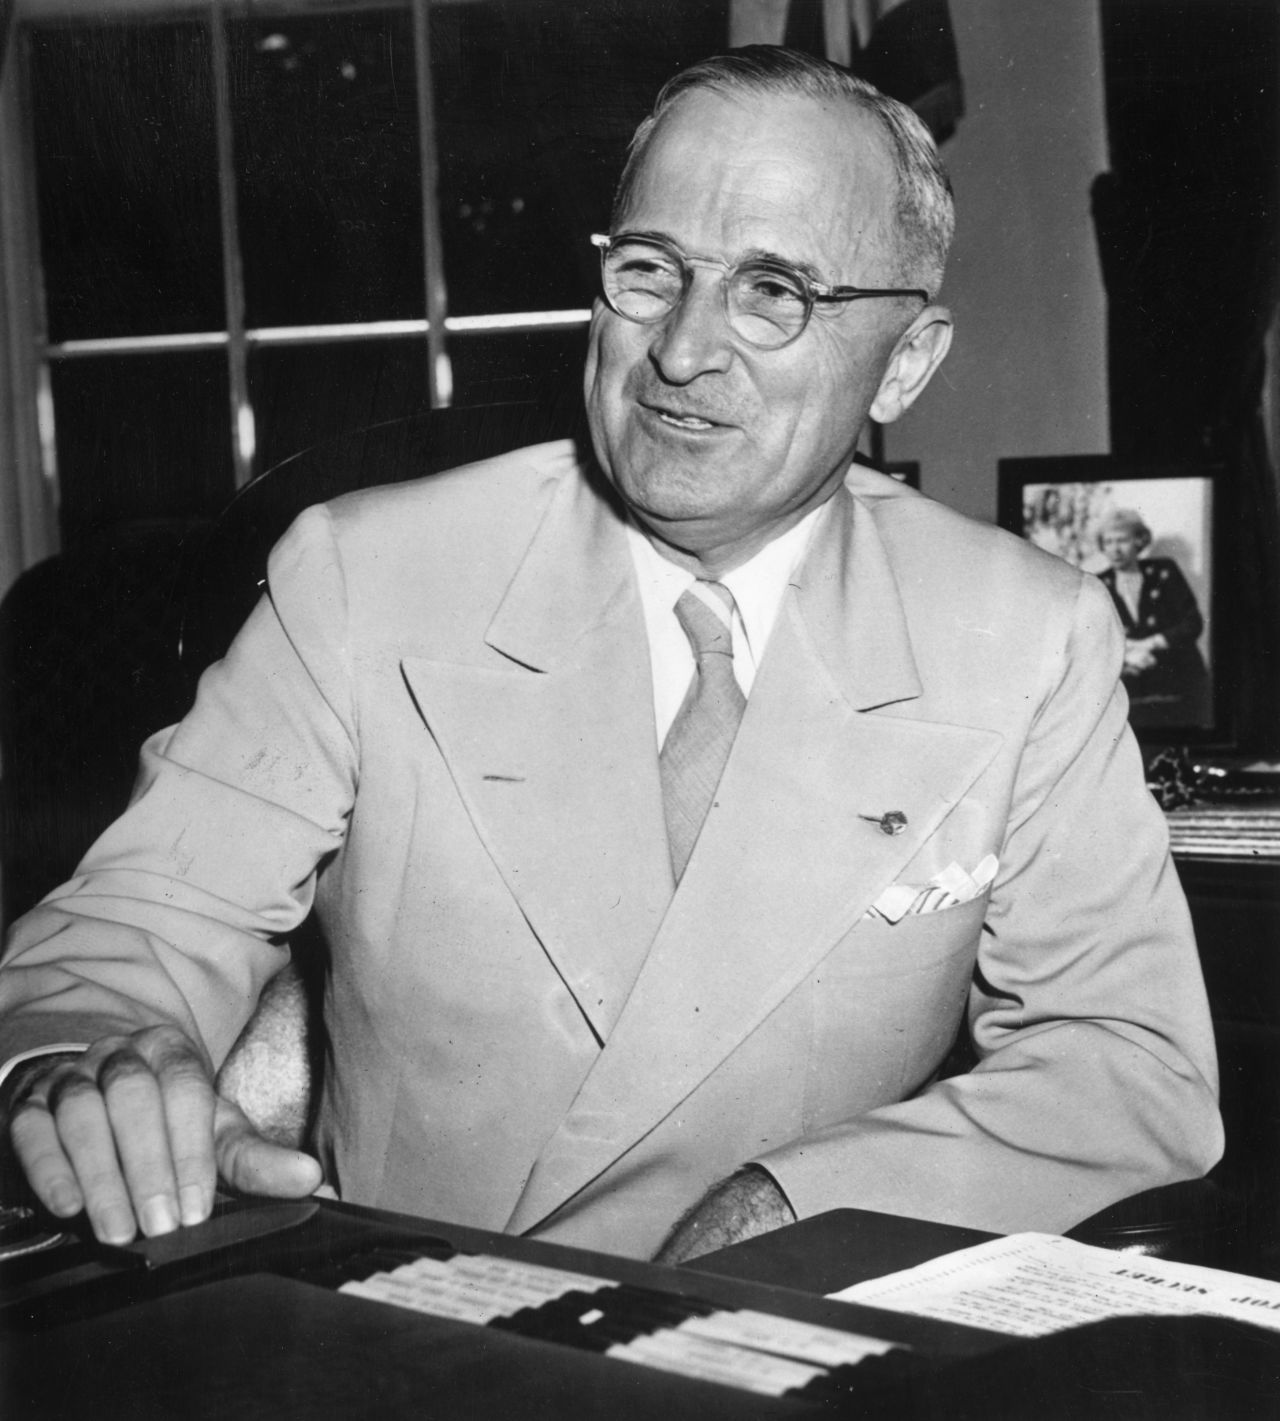 President Harry Truman was a <a href="http://www.whitehousemuseum.org/grounds/horseshoe-pitch.htm" target="_blank" target="_blank">big fan of playing horseshoes</a> -- he even had a pitch installed outside the Oval Office. <a href="http://bit.ly/1OH6Jui" target="_blank" target="_blank">Truman took it a step further by</a> having a horseshoe mounted above the door to his office for good luck.